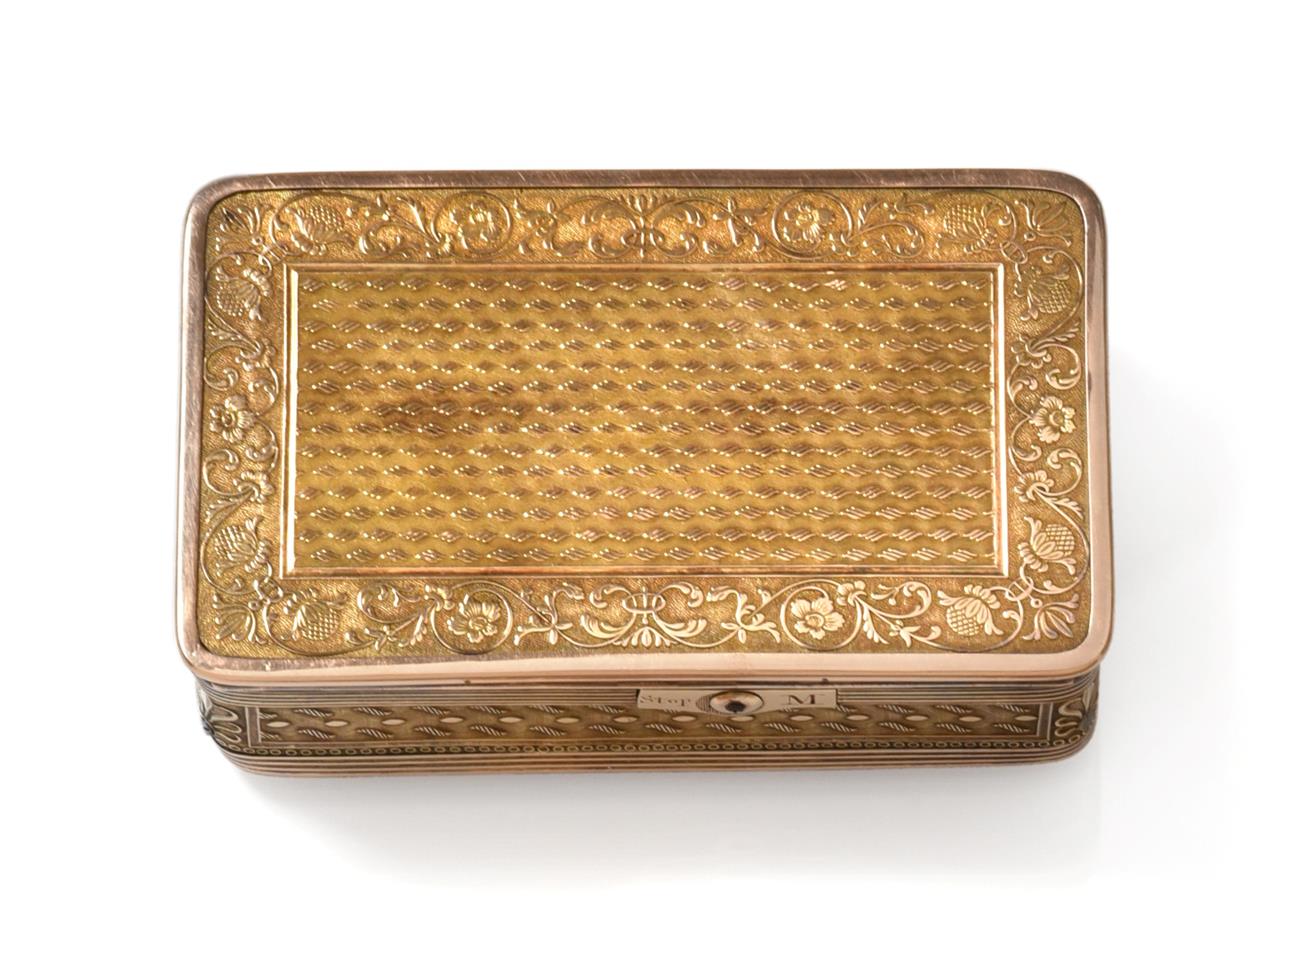 Lot 2033 - A French Empire Silver-Gilt Musical-Box, by L. Baudin, Paris, 1809-1819, oblong, the hinged...